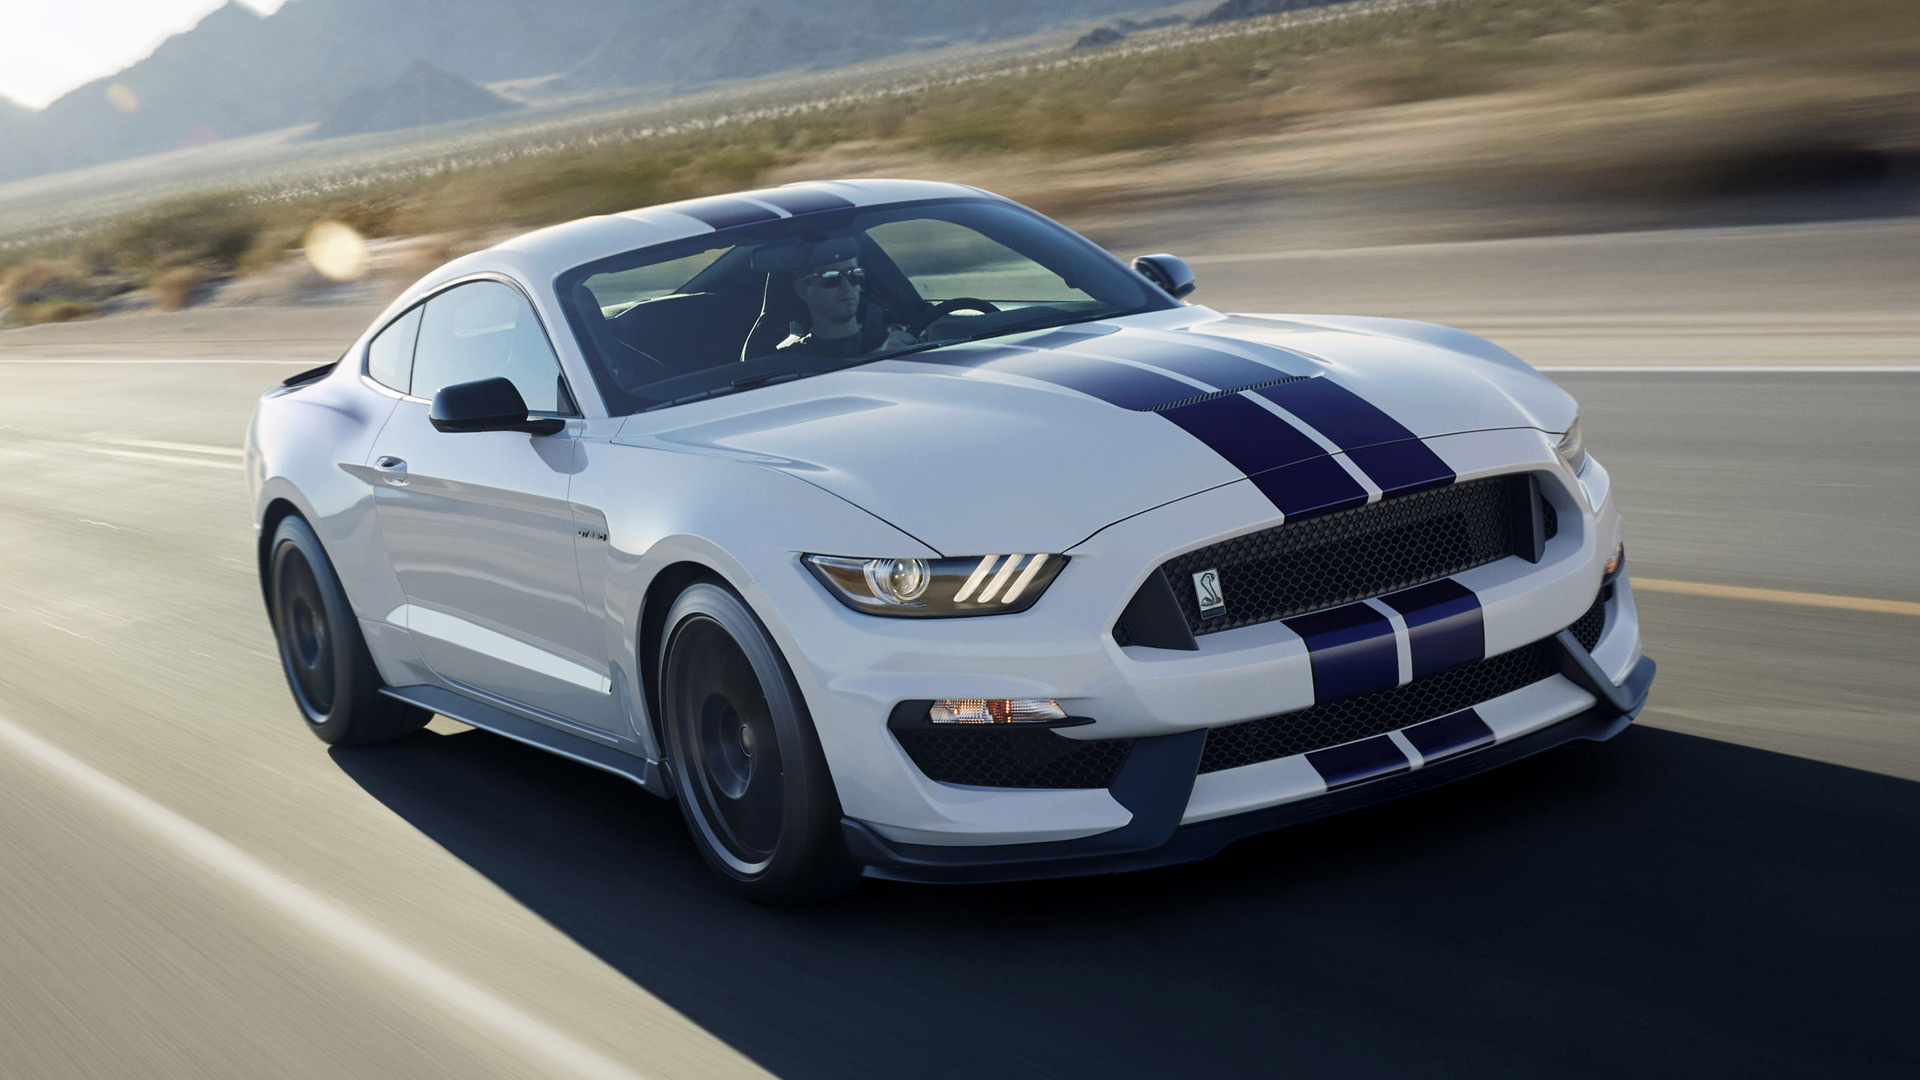 Shelby Ford Mustang Gt350 Wallpaper